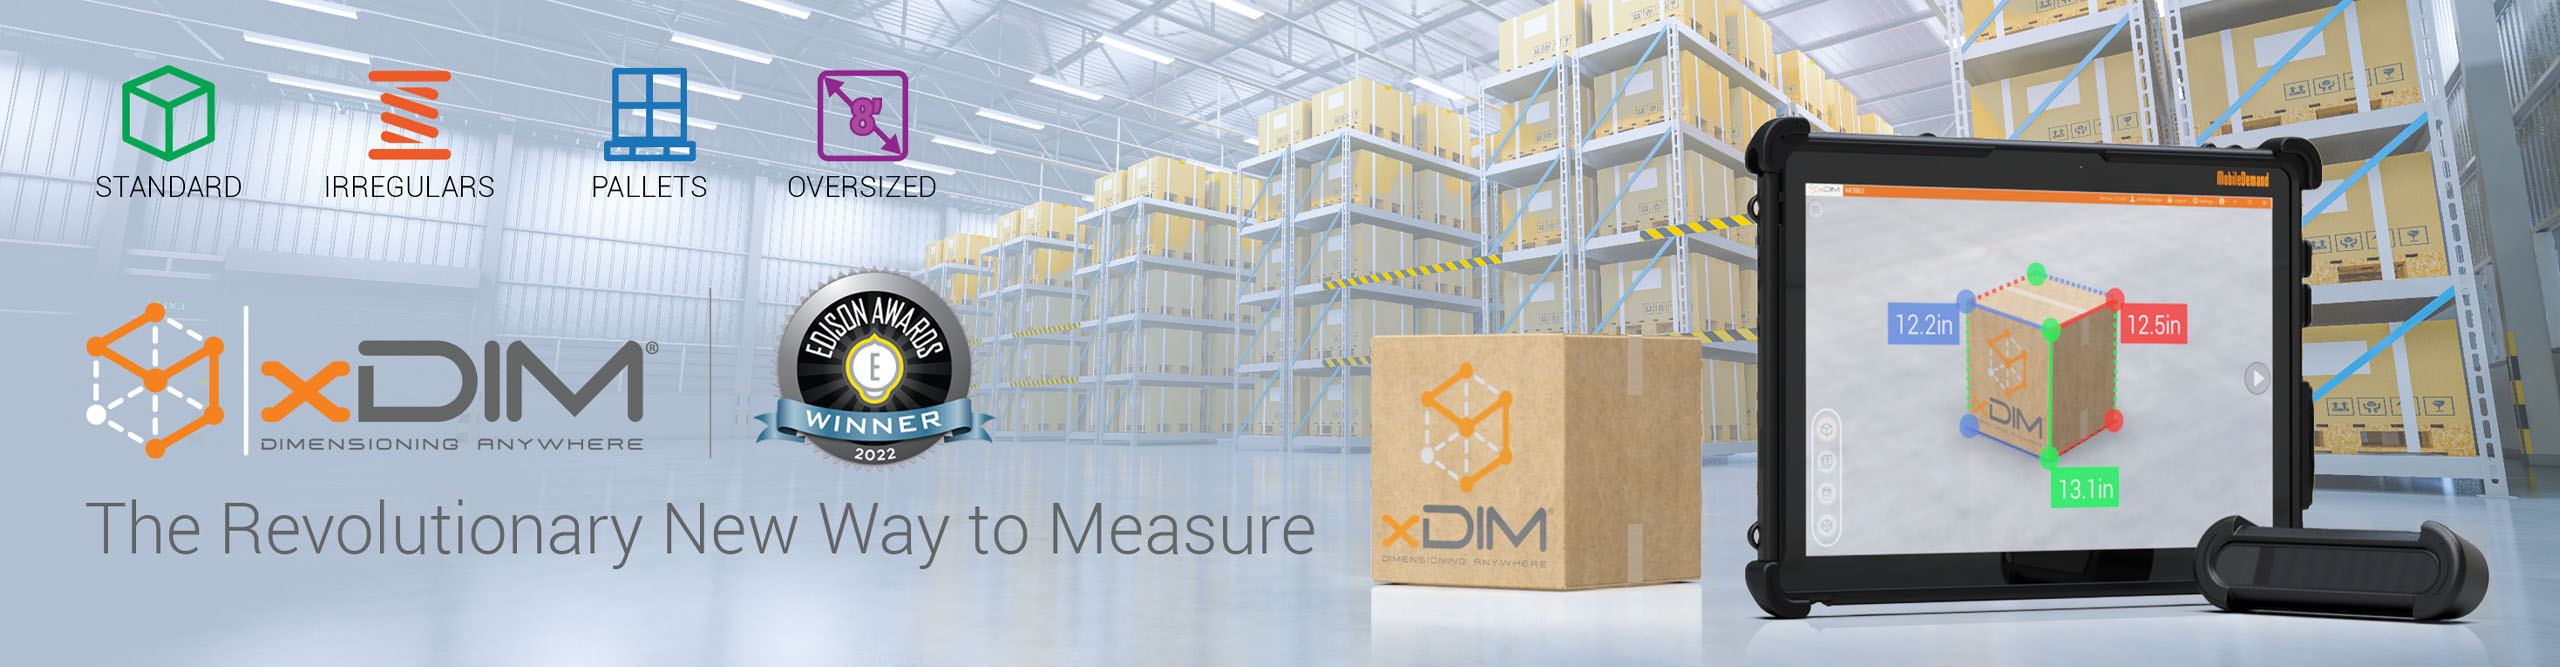 xDIM, Powered by 4D Mobile, the revolutionary new way to measure boxes and parcels